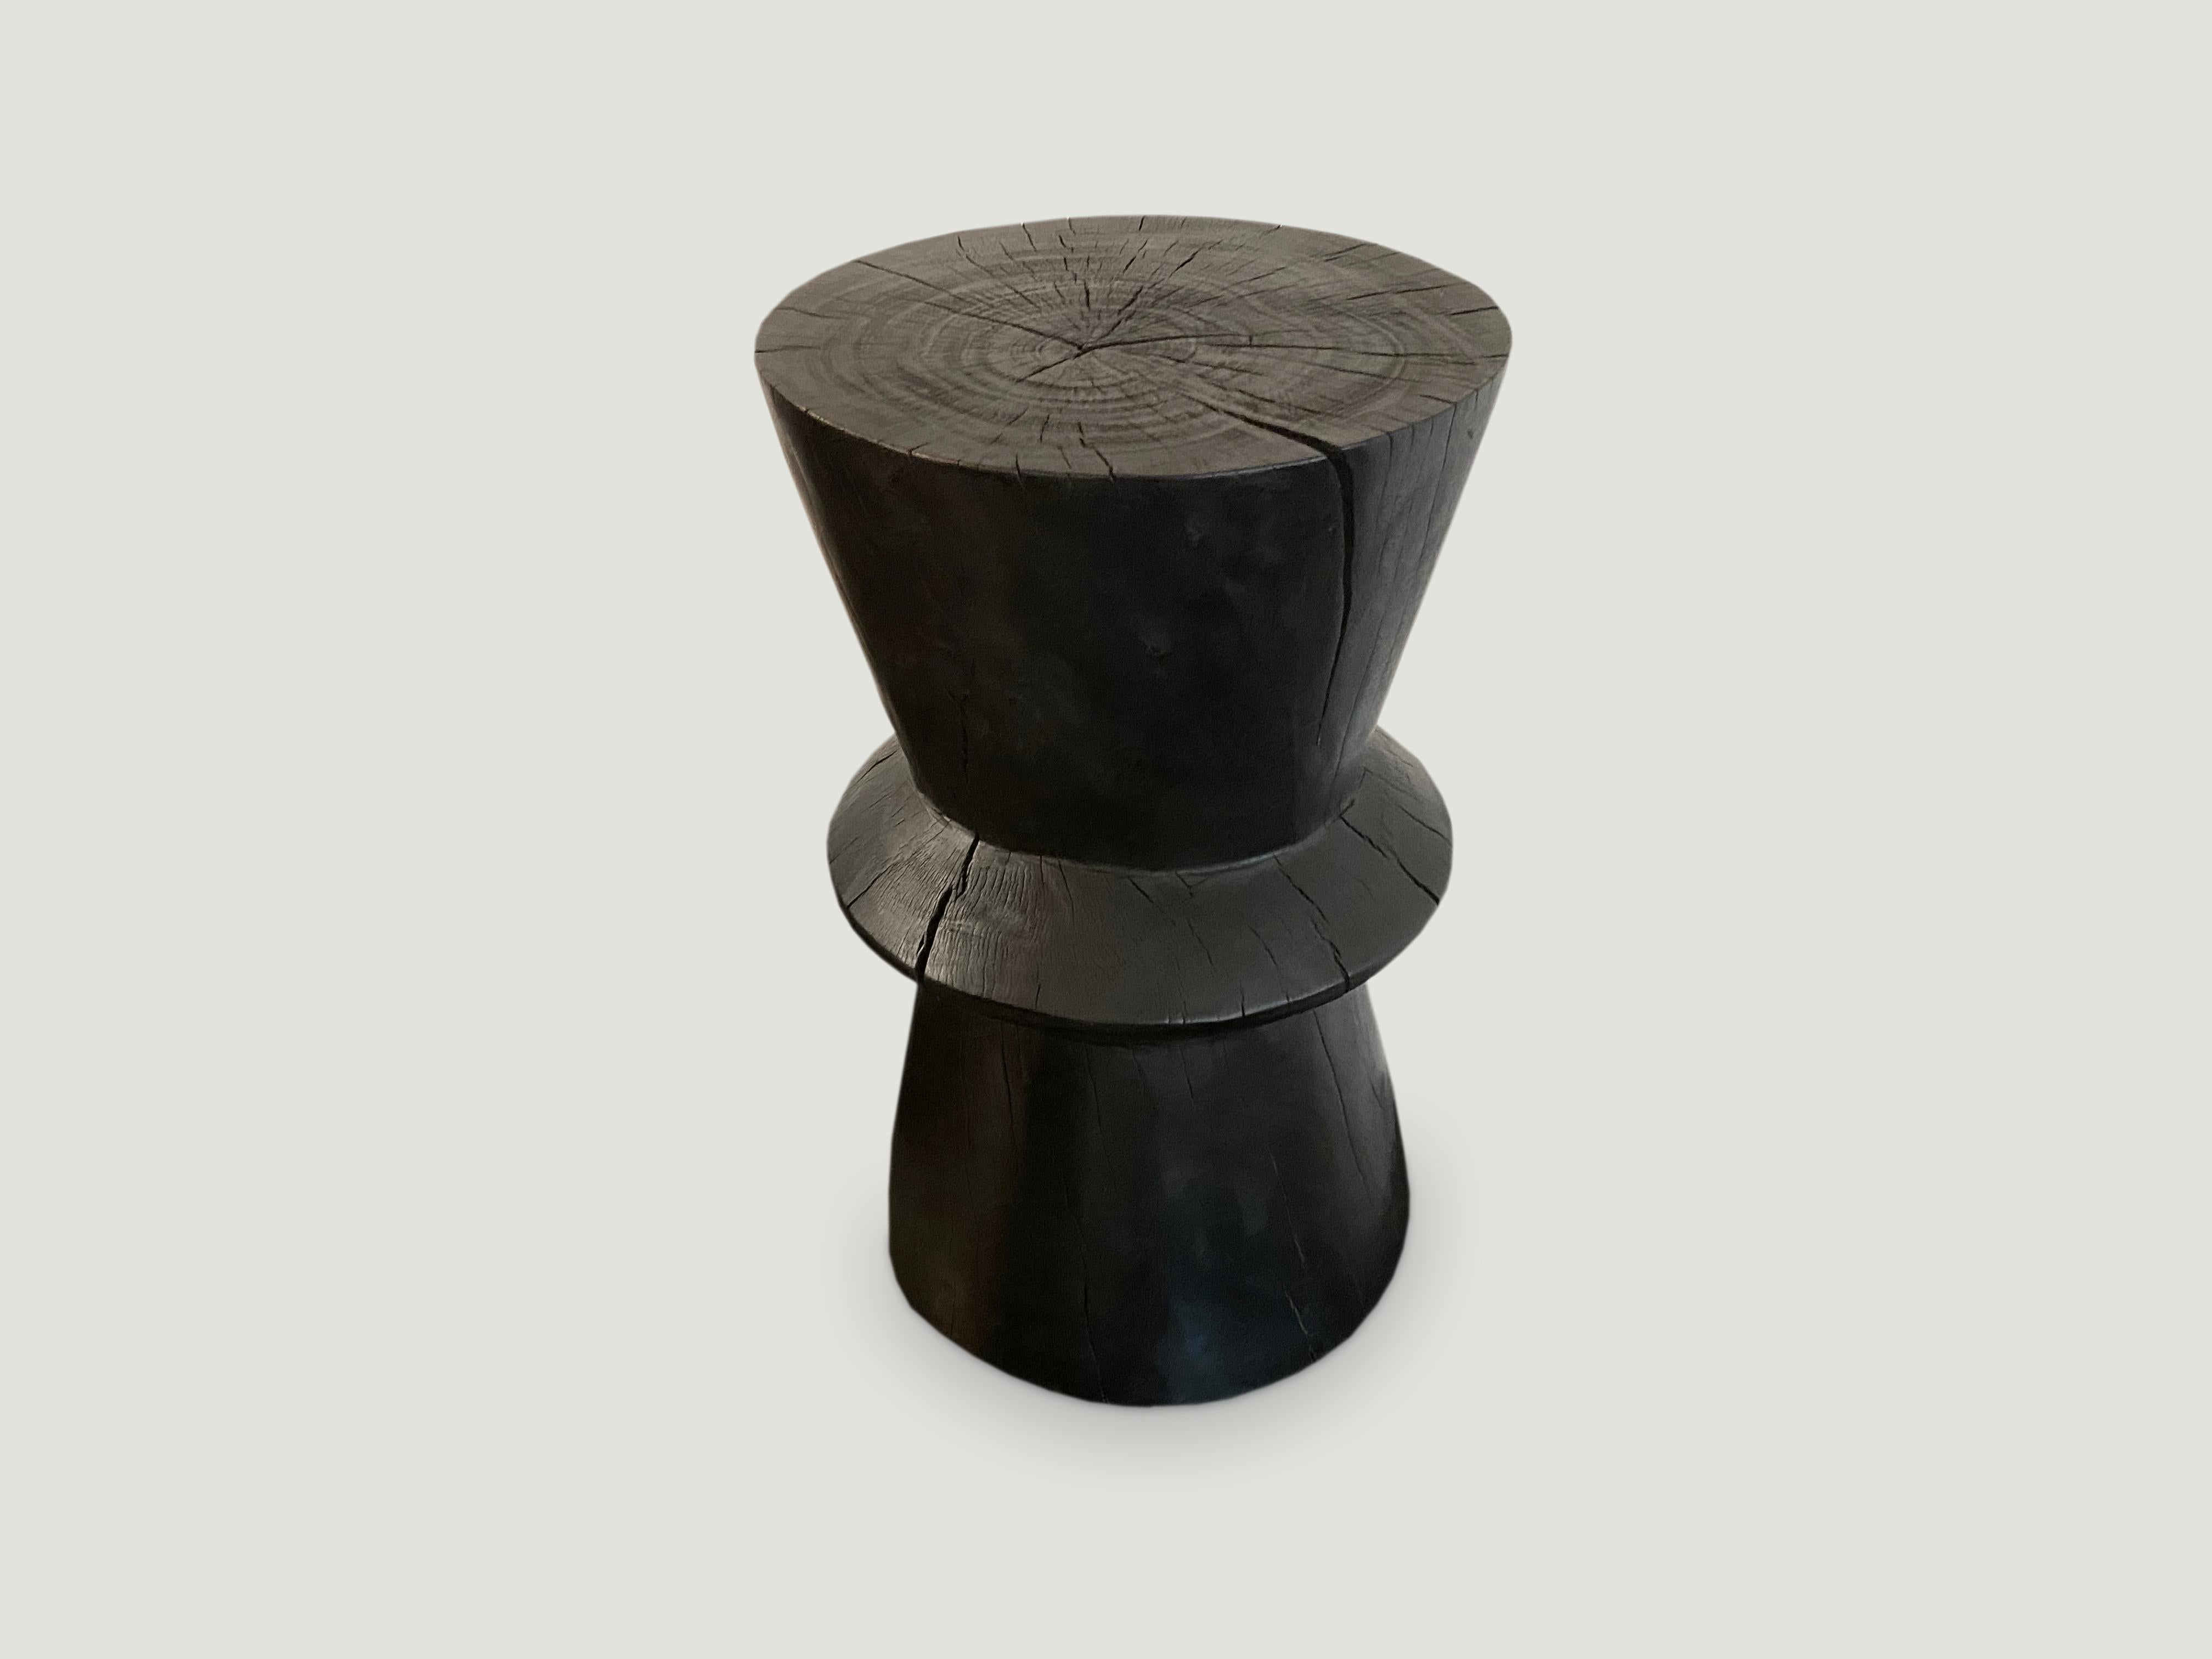 Hand carved side table made from reclaimed tamarind wood that celebrates cracks and crevices.

The Triple Burnt collection represents a unique line of modern furniture made from solid reclaimed wood. Burnt three times to produce a rich, charcoal